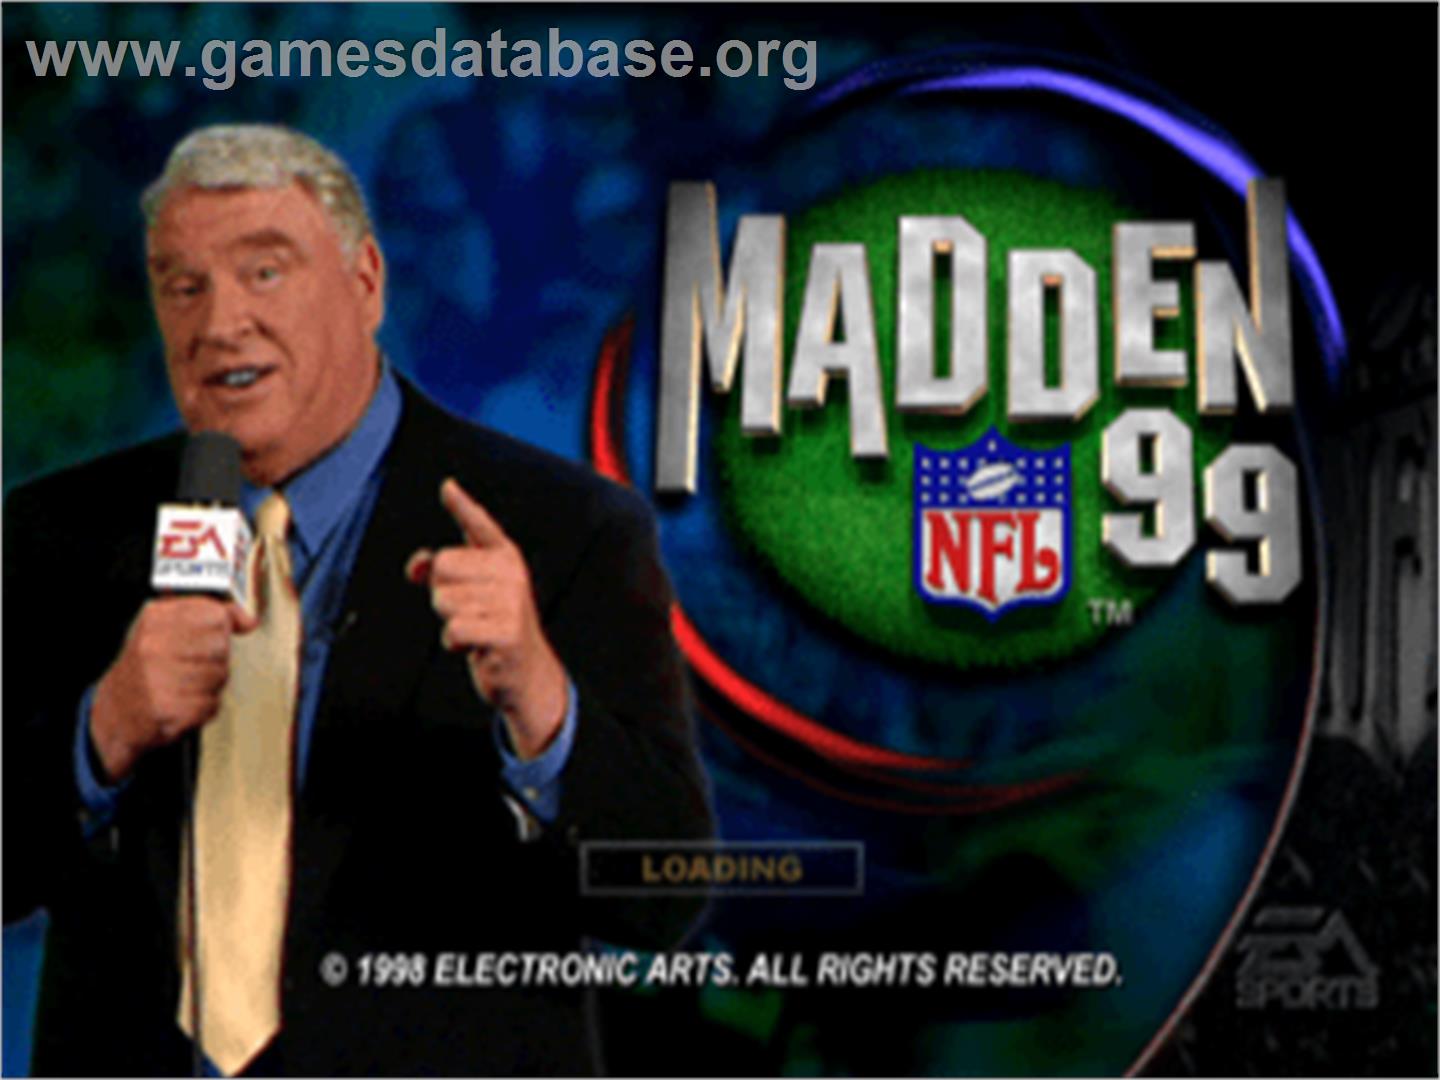 Madden NFL 99 - Sony Playstation - Artwork - Title Screen